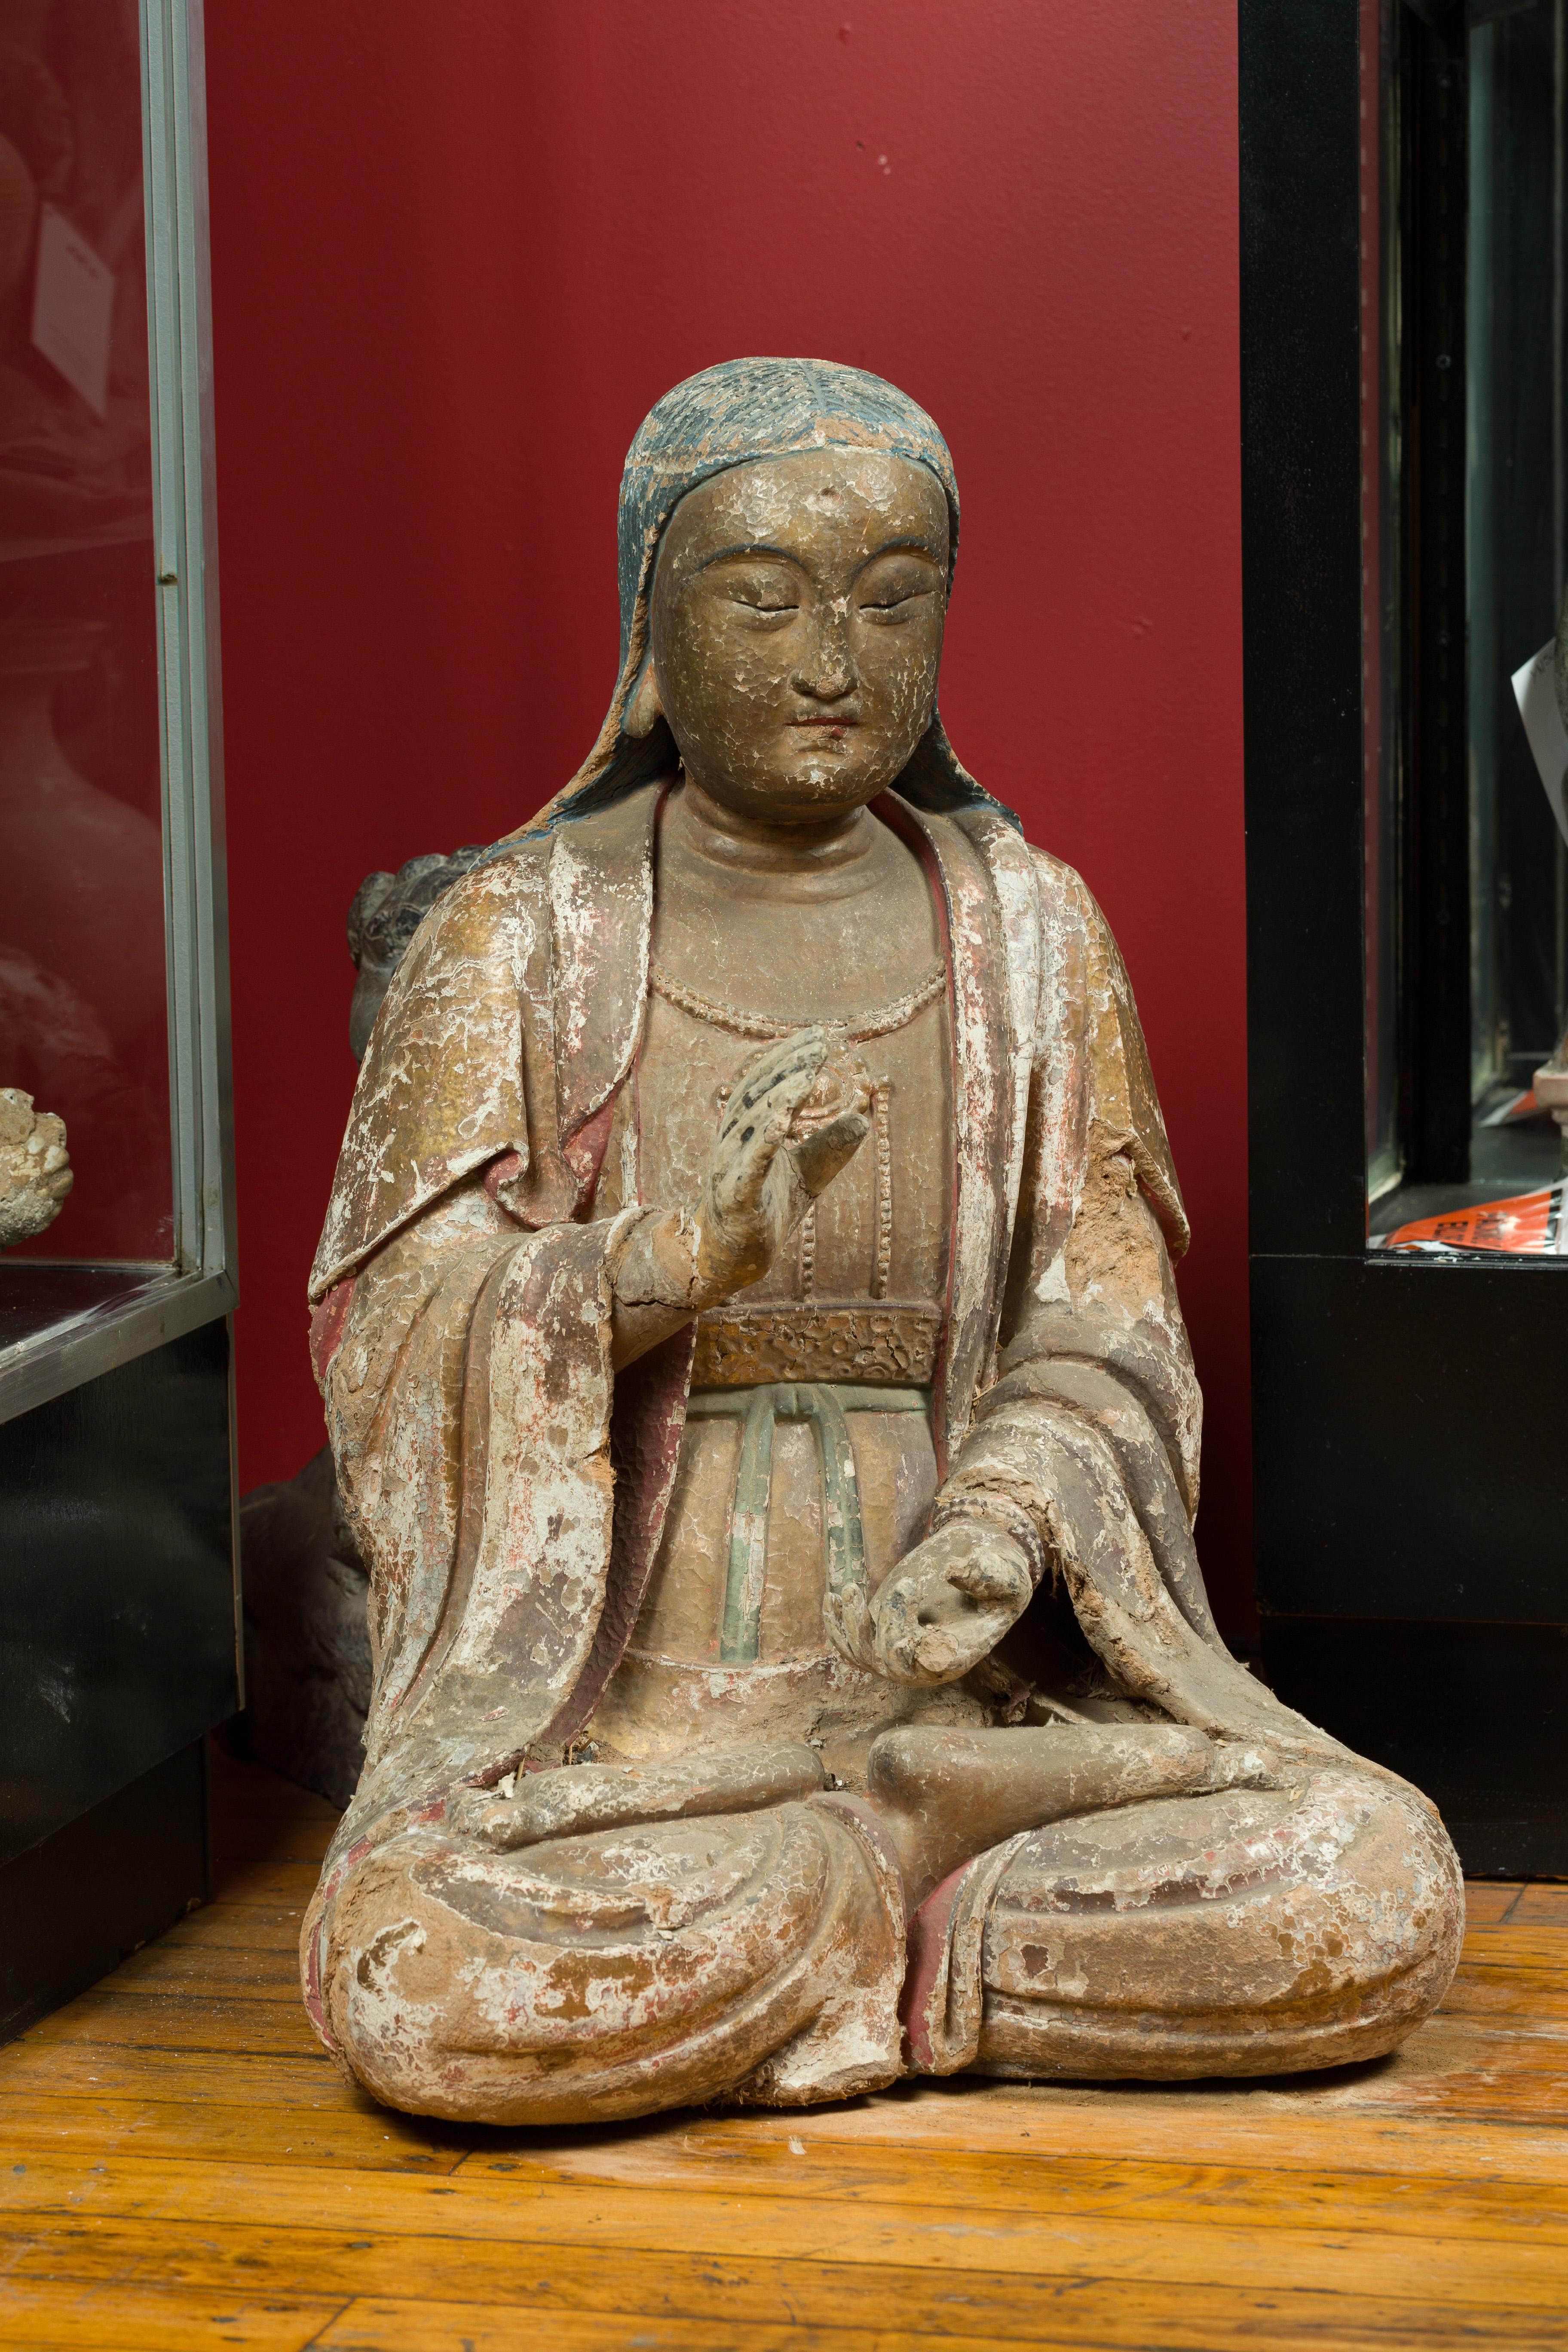 A Chinese Song Dynasty period painted stucco sculpture of Guanyin, Bodhisattva of Compassion, circa 960 to 1279. Created in China during the Song Dynasty, this seated sculpture depicts Guanyin the Bodhisattva of Compassion, wearing a dress, a coat